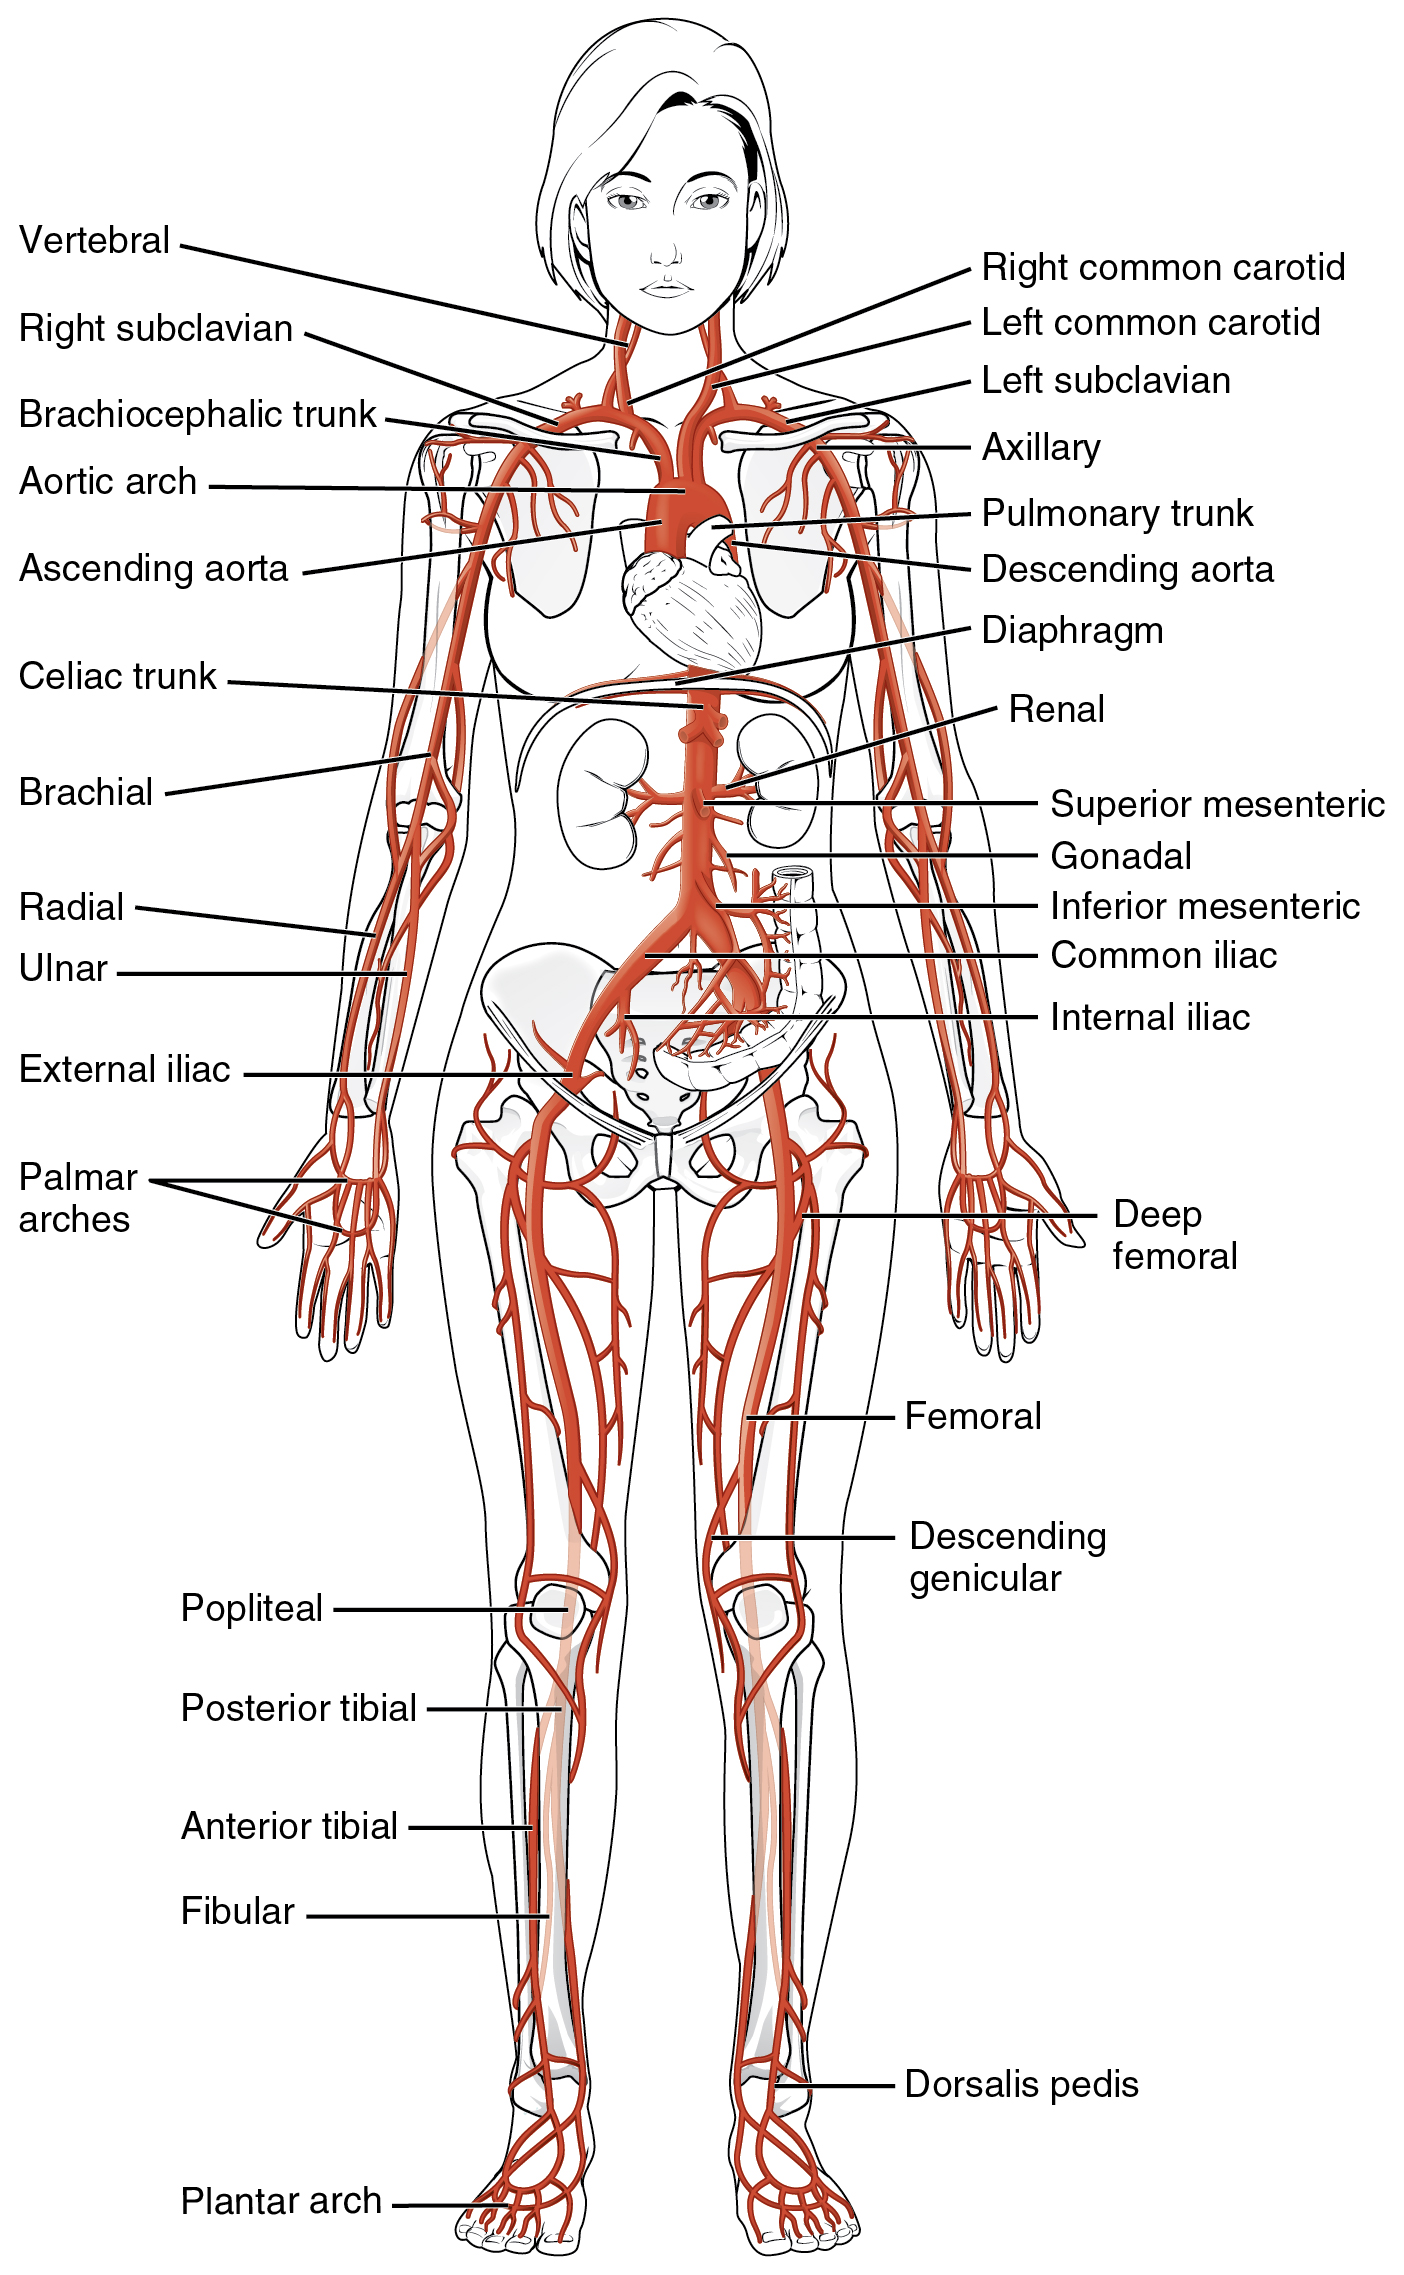 This diagrams shows the major arteries in the human body.